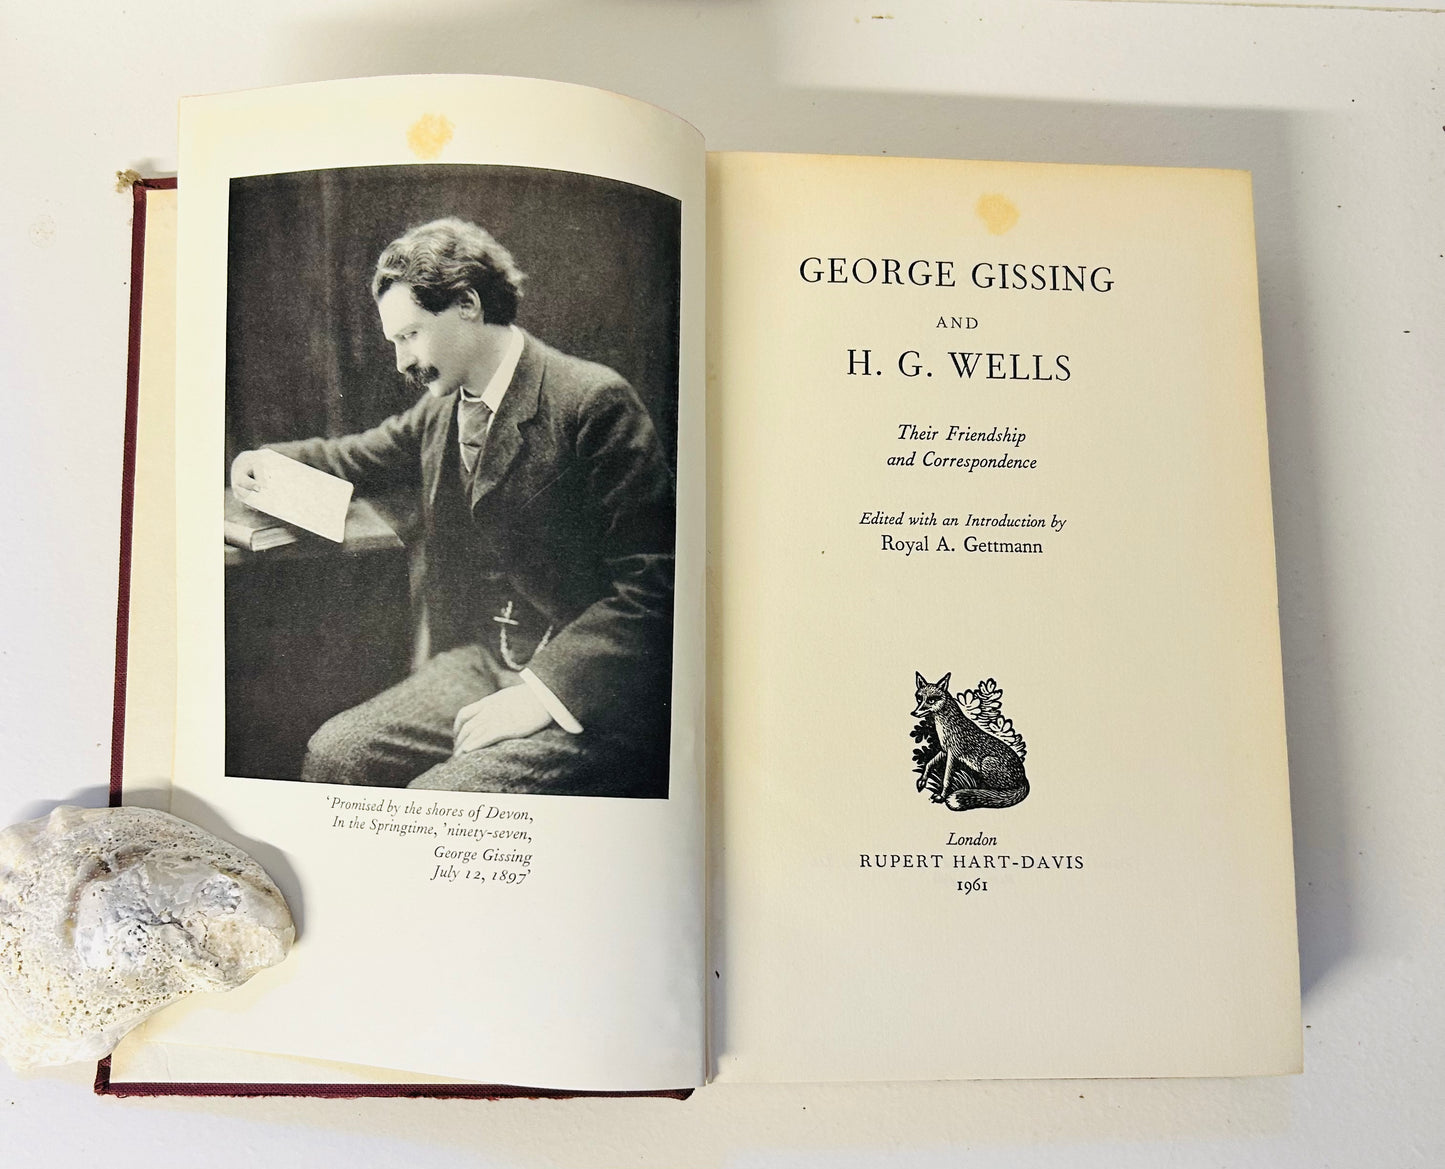 George Gissing and H.G. Wells